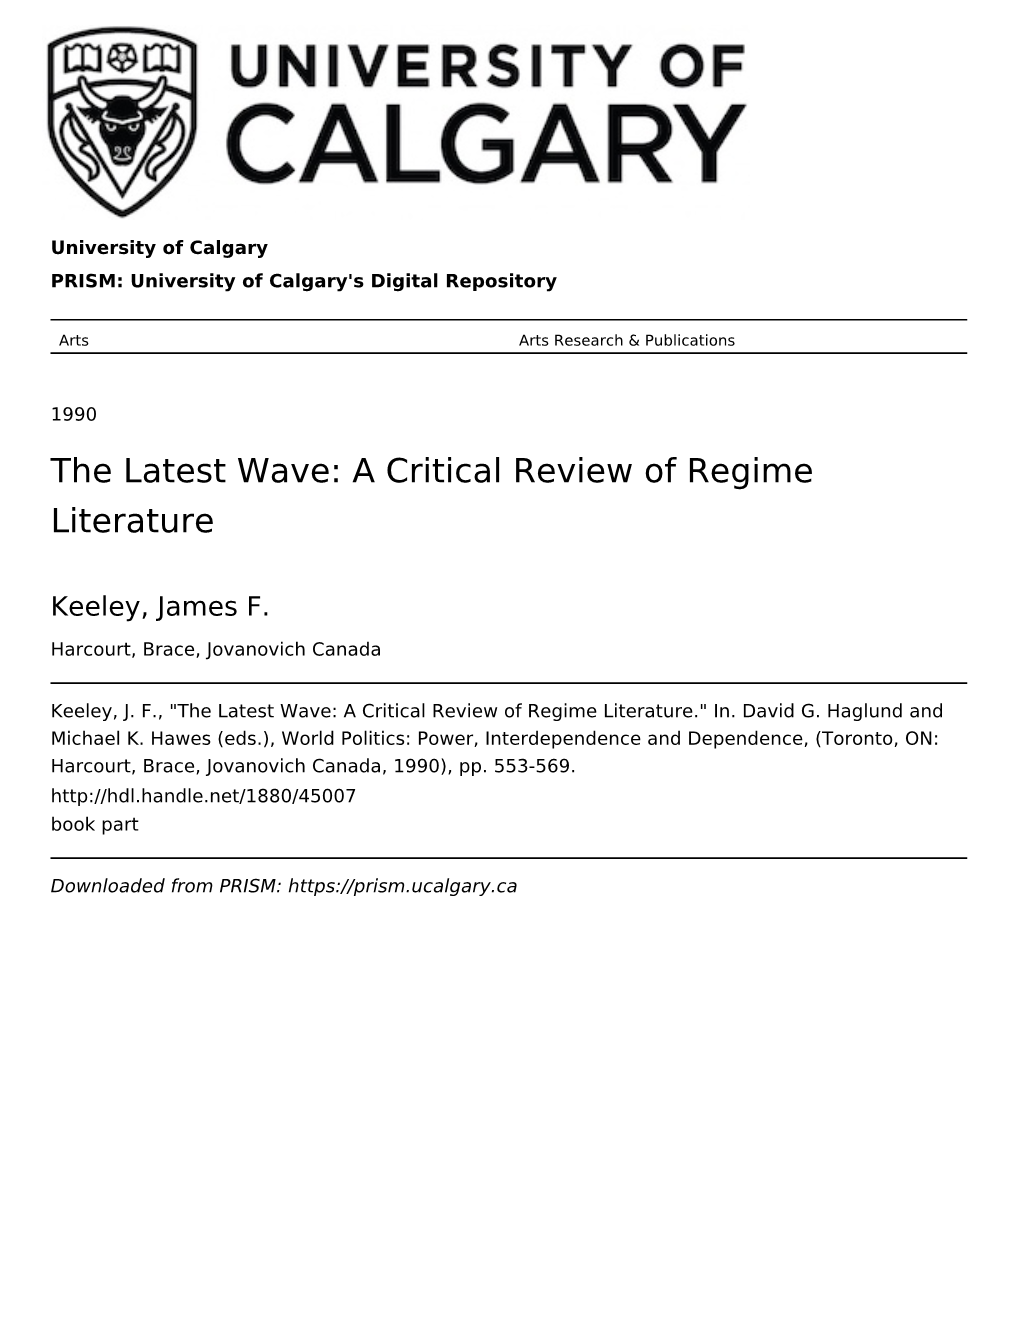 The Latest Wave: a Critical Review of Regime Literature